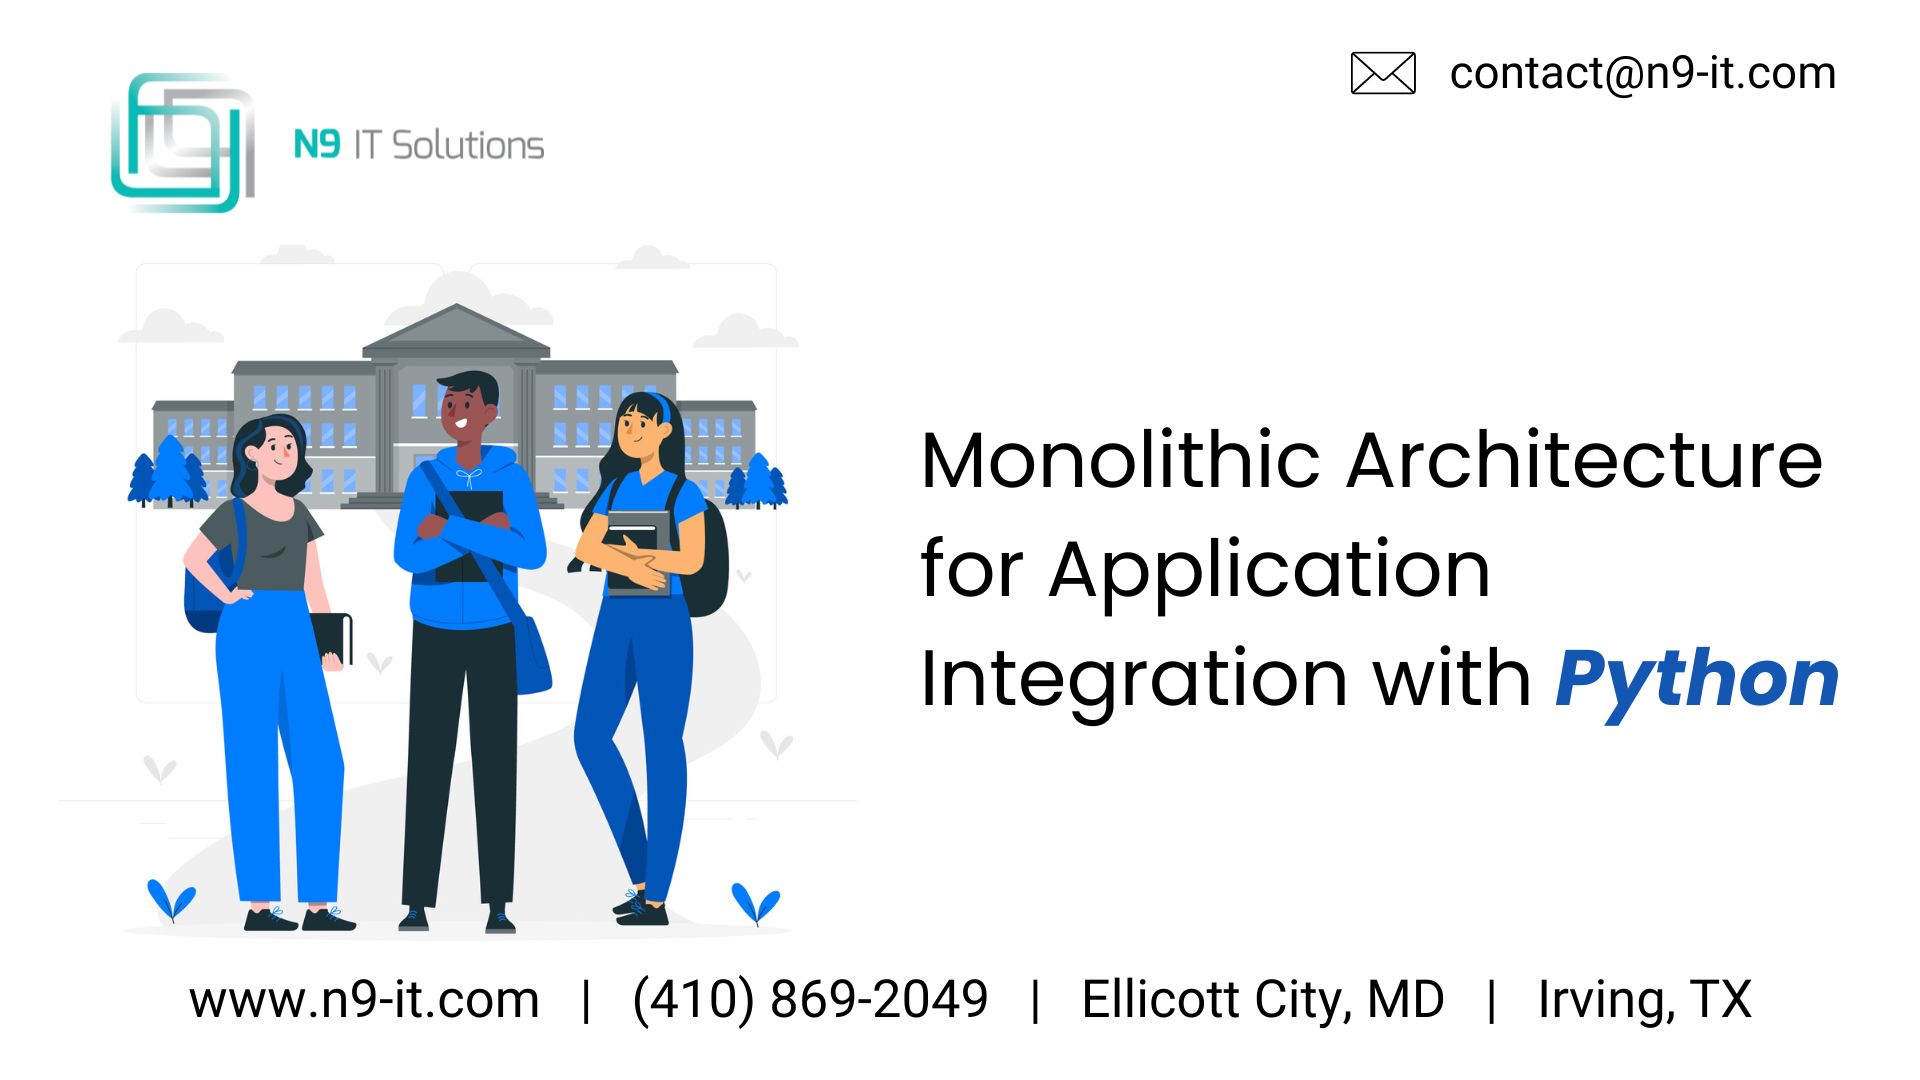 Monolithic Architecture for Application Integration with Python